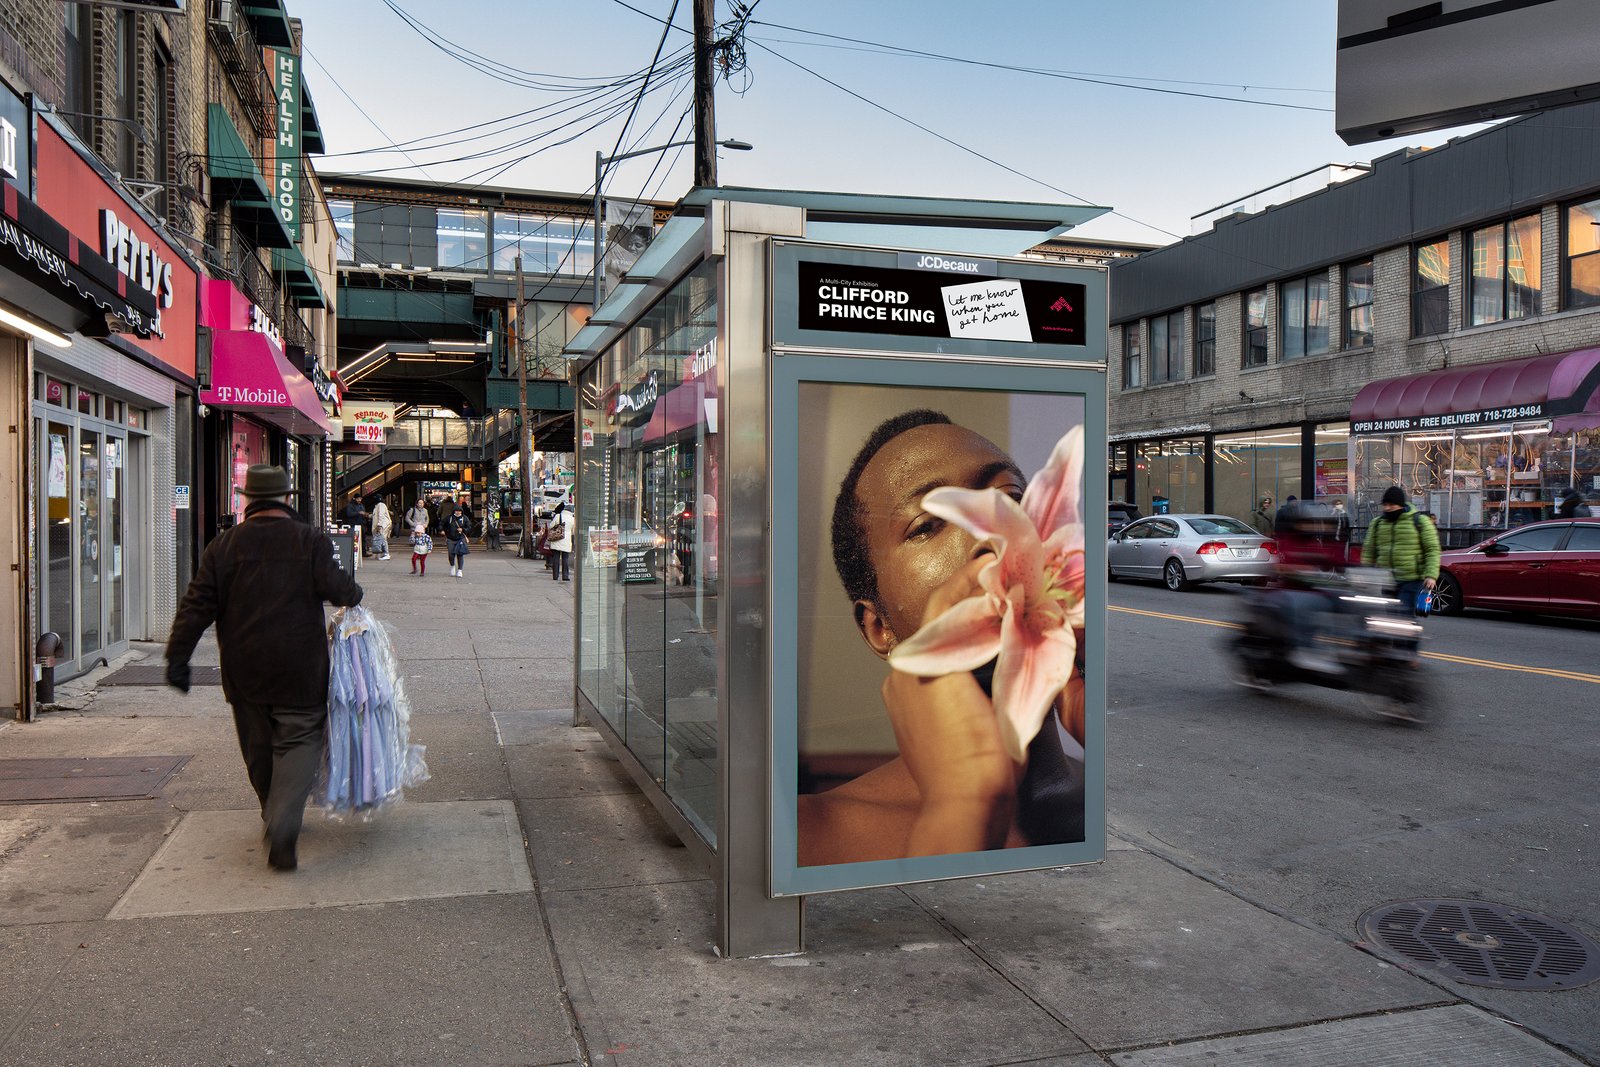 A street shot of a bus shelter featuring a man holding a flower in front of his face.